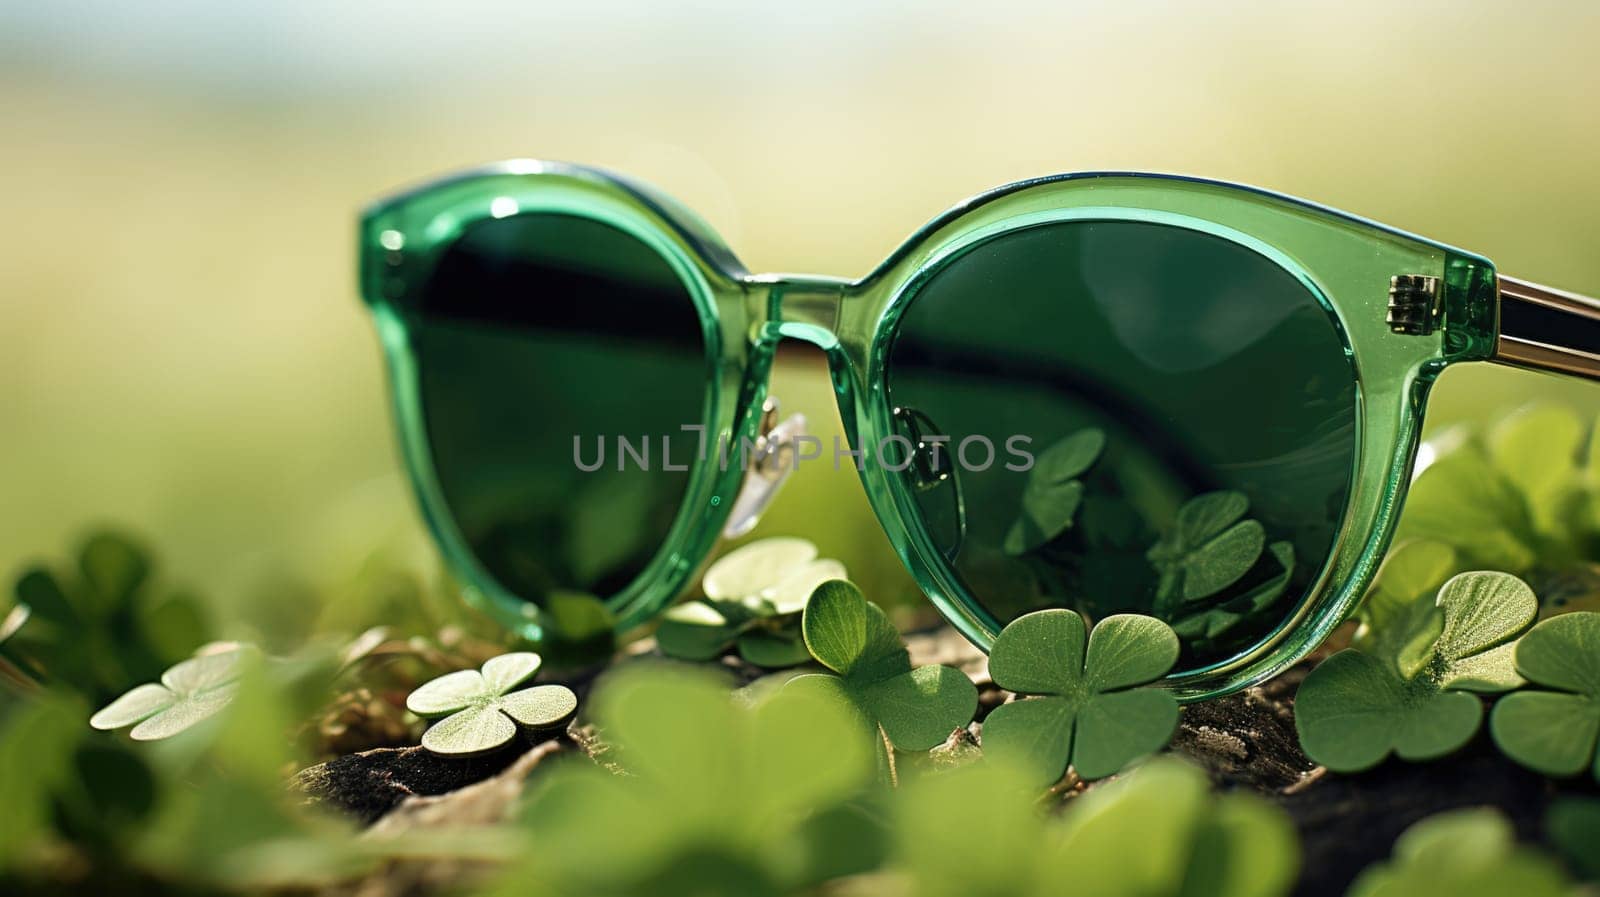 Fashionable Vintage Brown Sunglasses on Top of Lush Four-Leaf Clovers Field Under the Sunlight. St Patricks Day by JuliaDorian